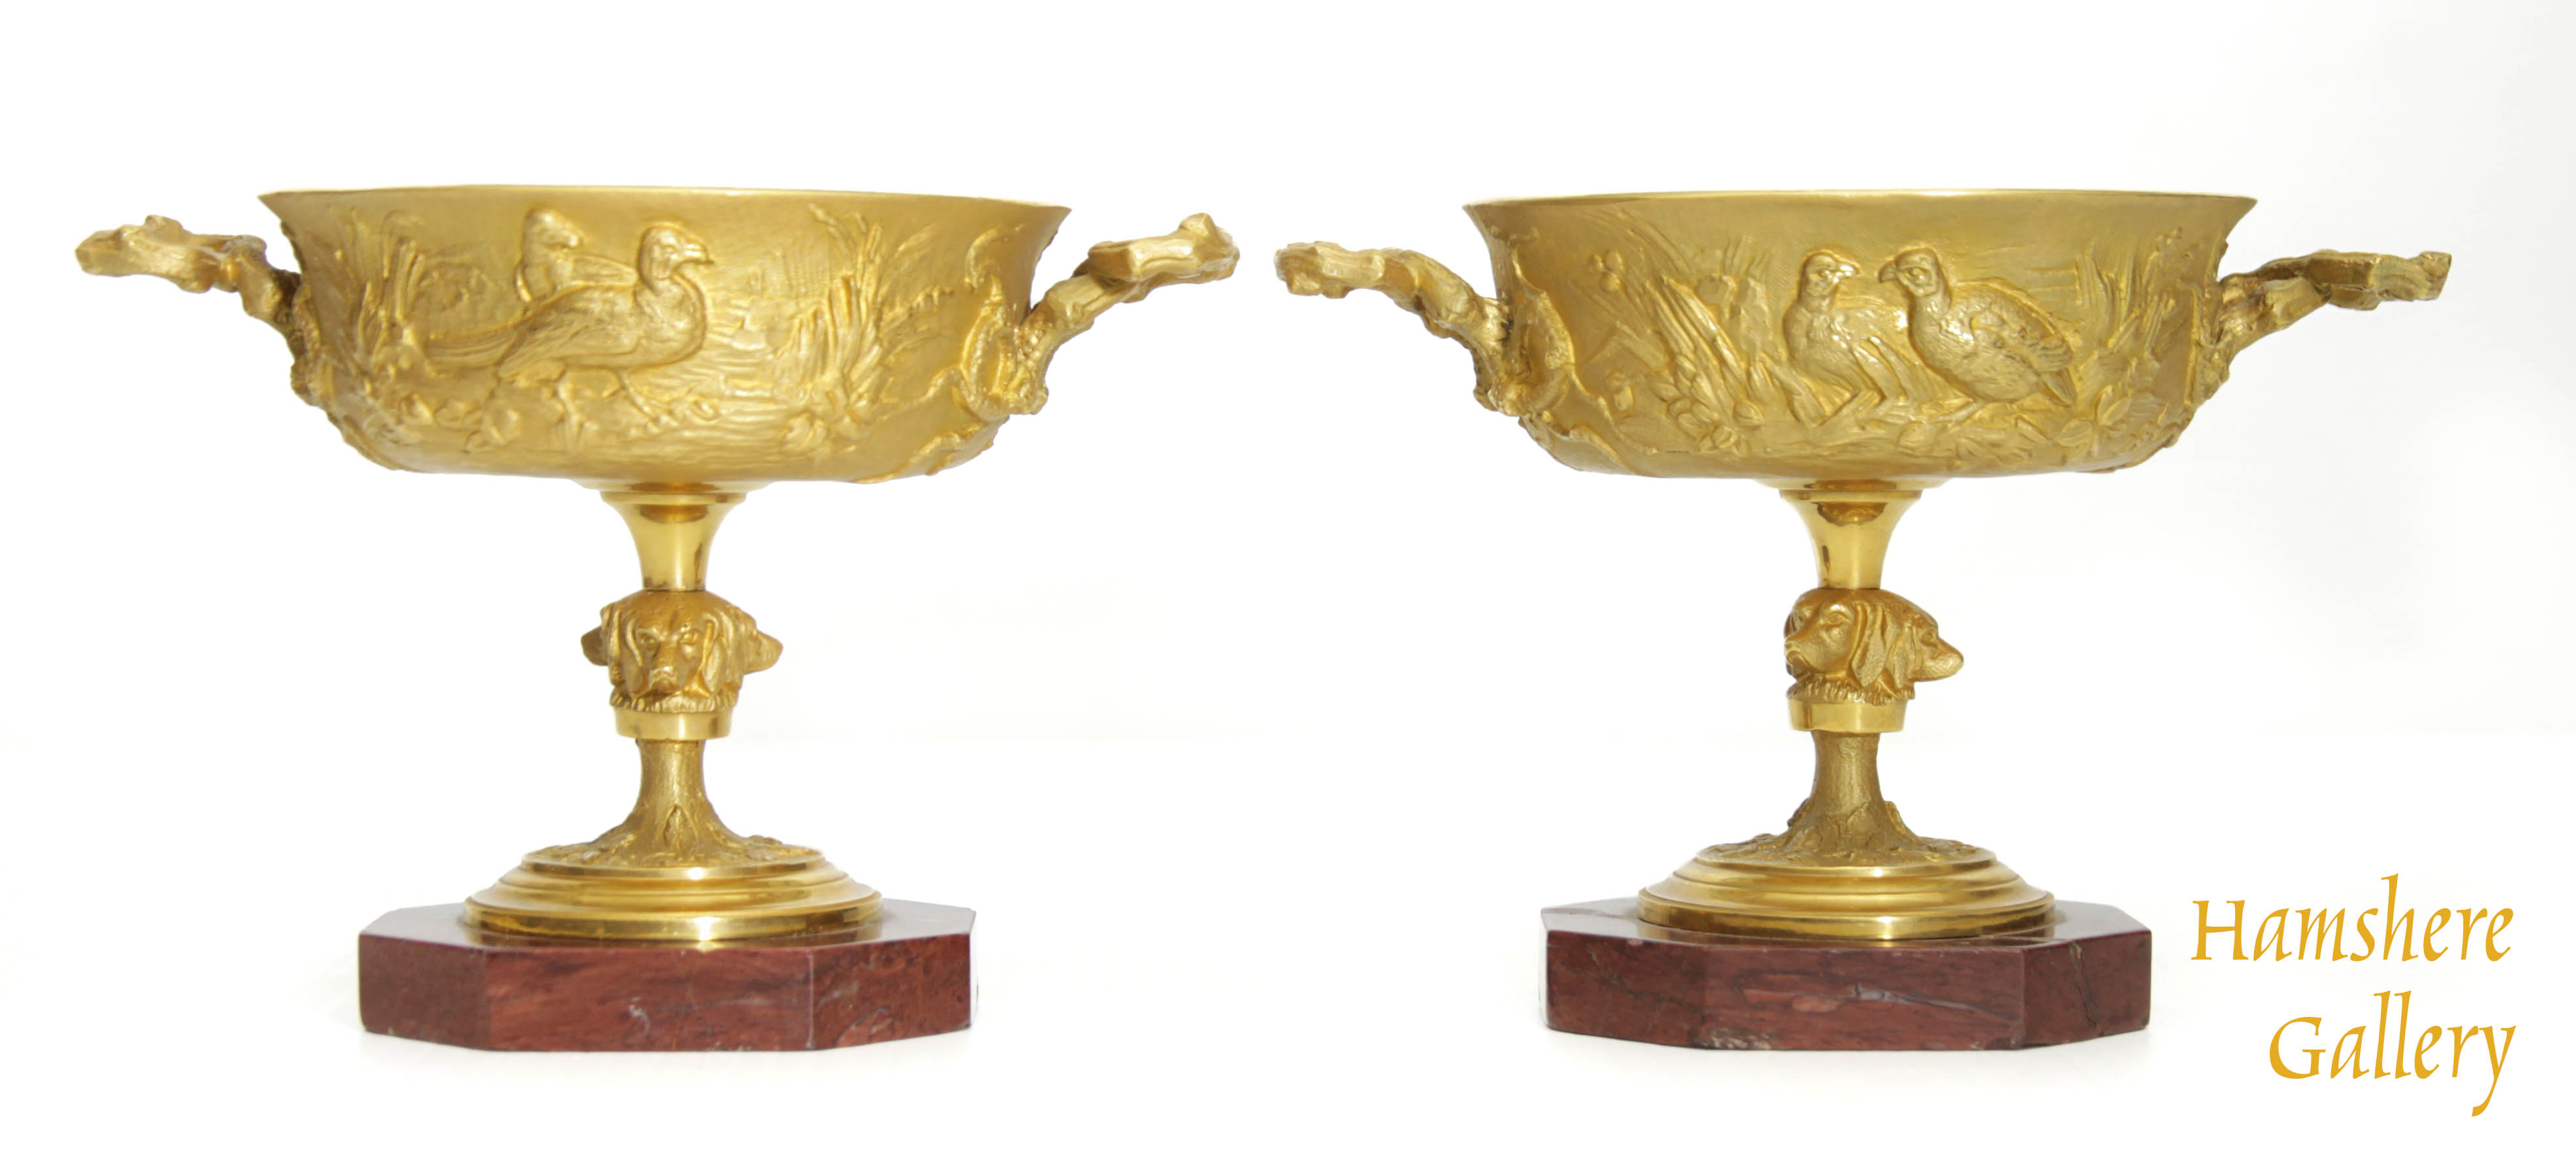 Click to see full size: A pair of bronze dorÃ© hunting / chasse, tazza / coupes of partridge, pheasants, Setter / hounds attributable to Christophe Fratin (French, 1800-1864)- A pair of bronze dorÃ© hunting / chasse, tazza / coupes of partridge, pheasants, Setter / hounds attributable to Christophe Fratin (French, 1800-1864)